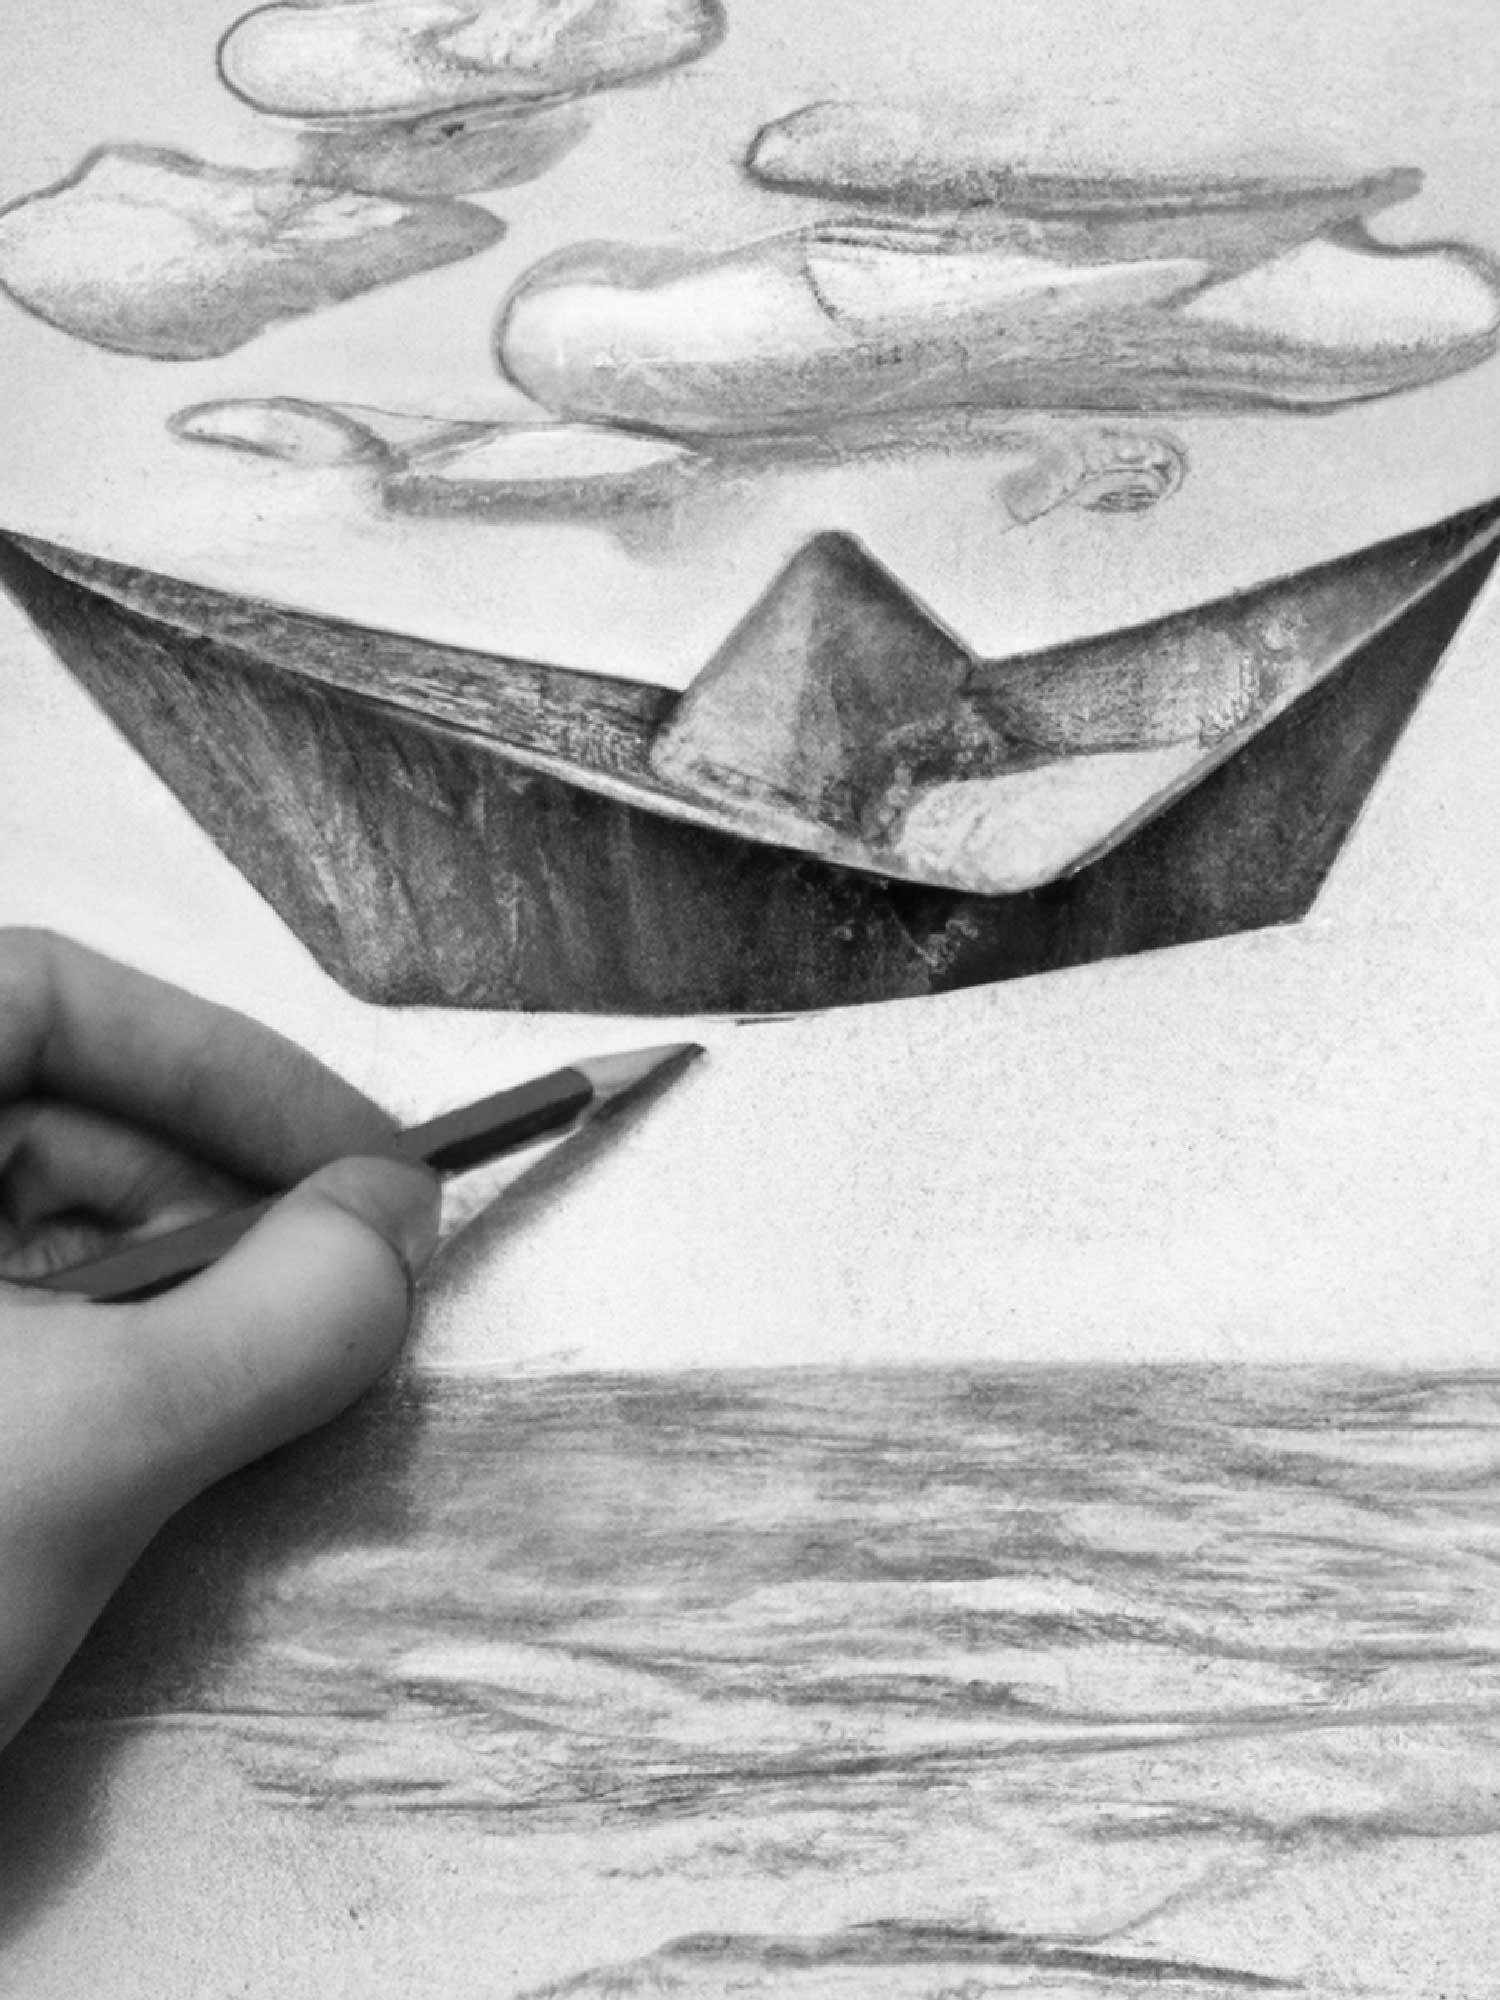 One photo shows a drawing of a paper boat flying over the sea.